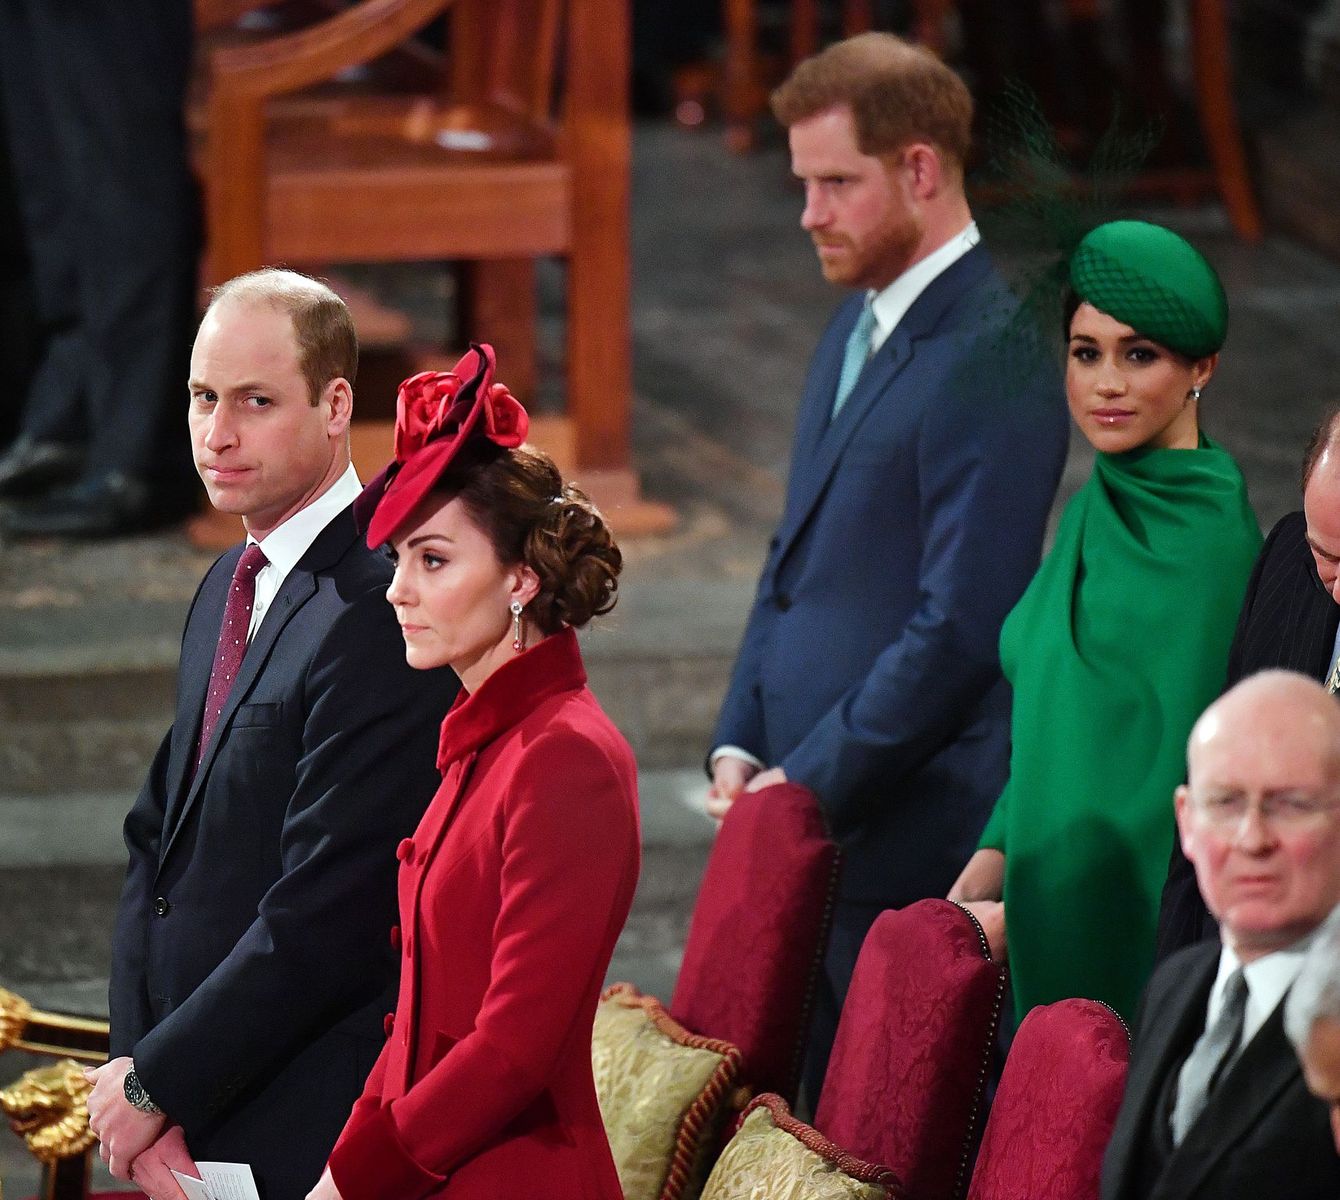 Prince William, Duke of Cambridge, Kate Middleton, Duchess of Cambridge, Prince Harry, Duke of Sussex, and Meghan Markle, Duchess of Sussex at the Commonwealth Day Service 2020 in London, England | Photo: Phil Harris - WPA Pool/Getty Images